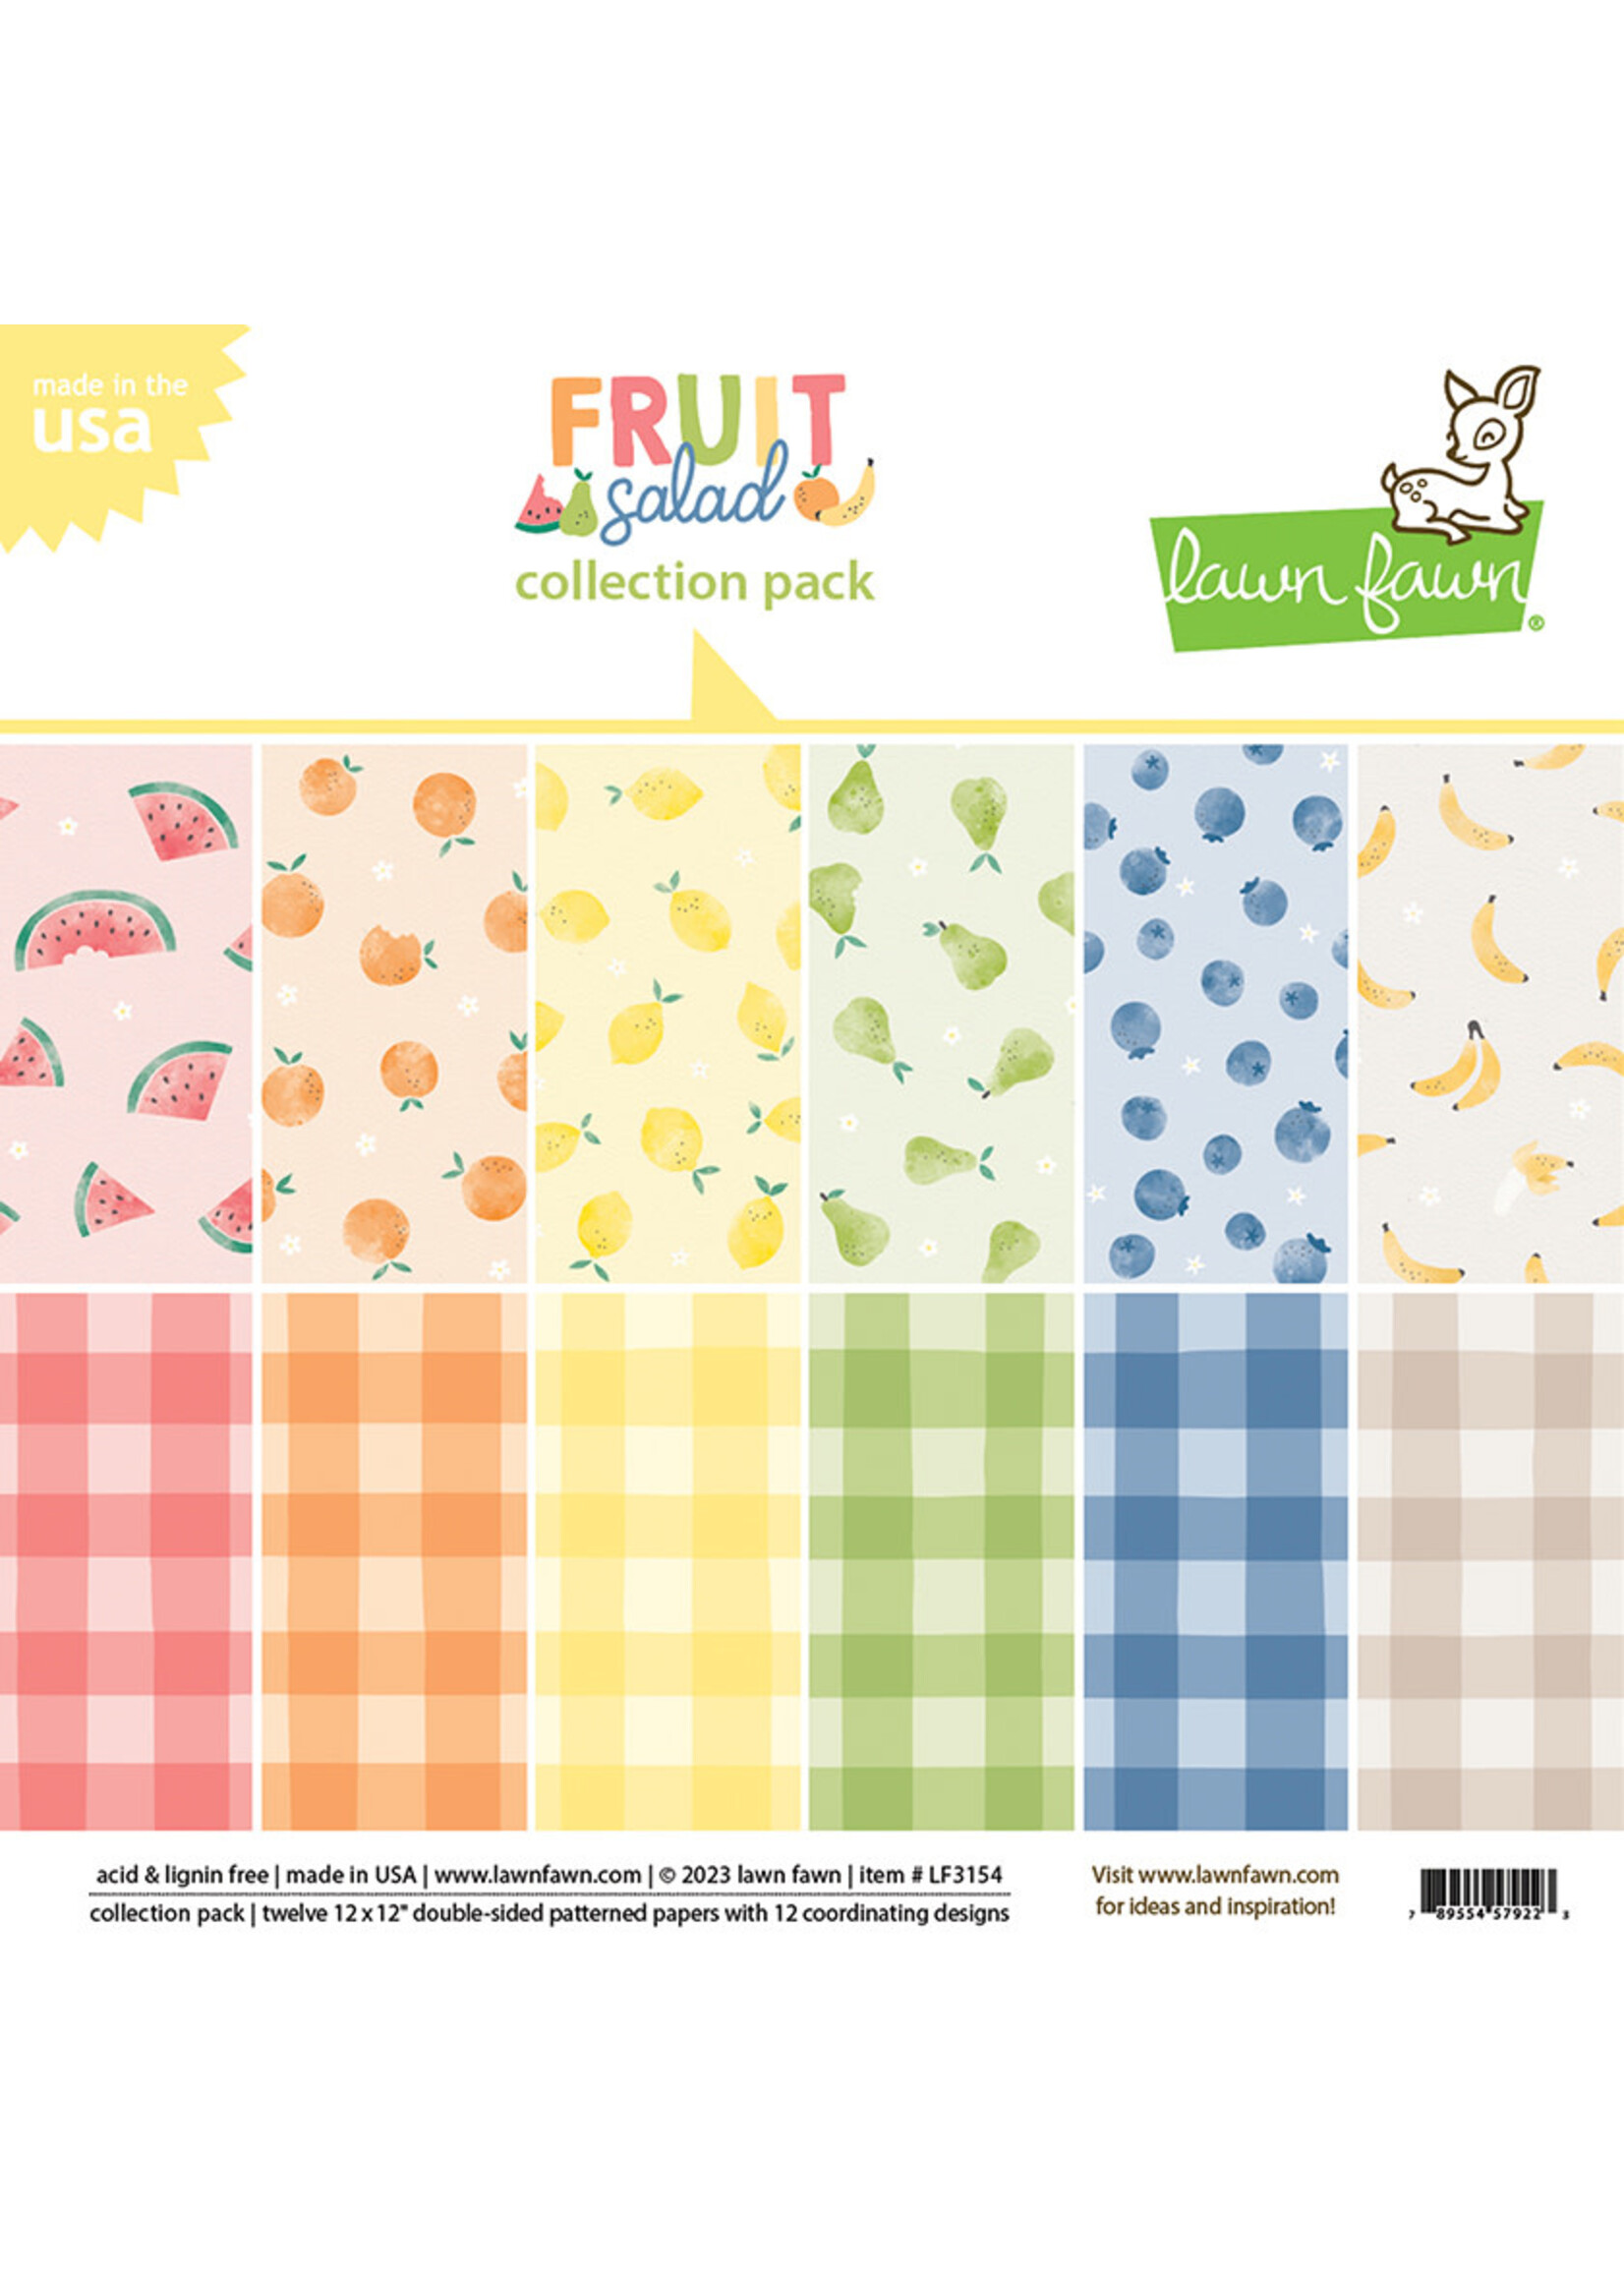 Lawn Fawn fruit salad collection pack